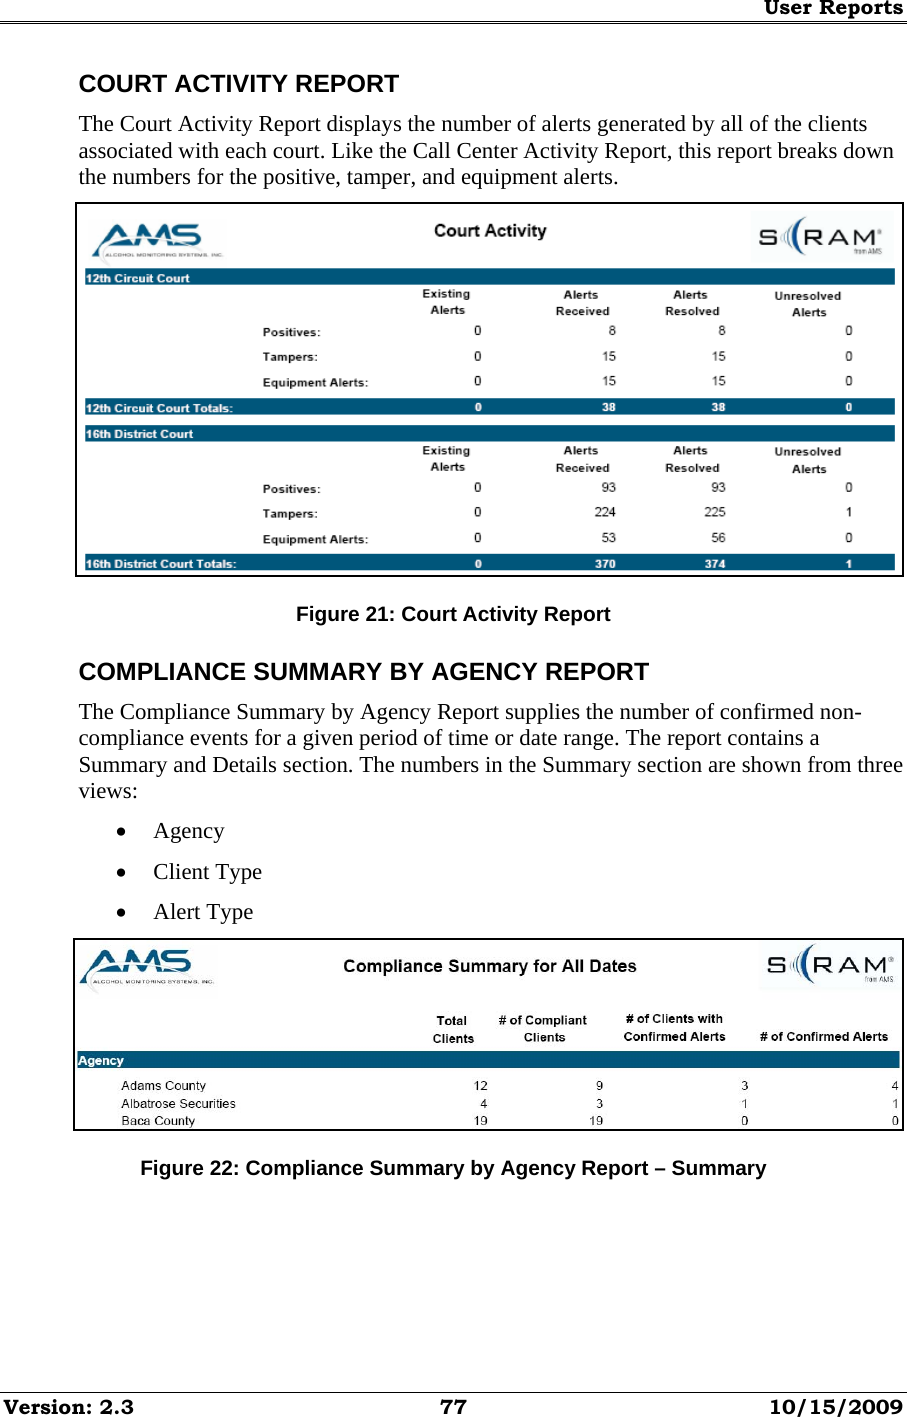 User Reports Version: 2.3  77  10/15/2009 COURT ACTIVITY REPORT The Court Activity Report displays the number of alerts generated by all of the clients associated with each court. Like the Call Center Activity Report, this report breaks down the numbers for the positive, tamper, and equipment alerts.  Figure 21: Court Activity Report COMPLIANCE SUMMARY BY AGENCY REPORT The Compliance Summary by Agency Report supplies the number of confirmed non-compliance events for a given period of time or date range. The report contains a Summary and Details section. The numbers in the Summary section are shown from three views: • Agency • Client Type • Alert Type  Figure 22: Compliance Summary by Agency Report – Summary 